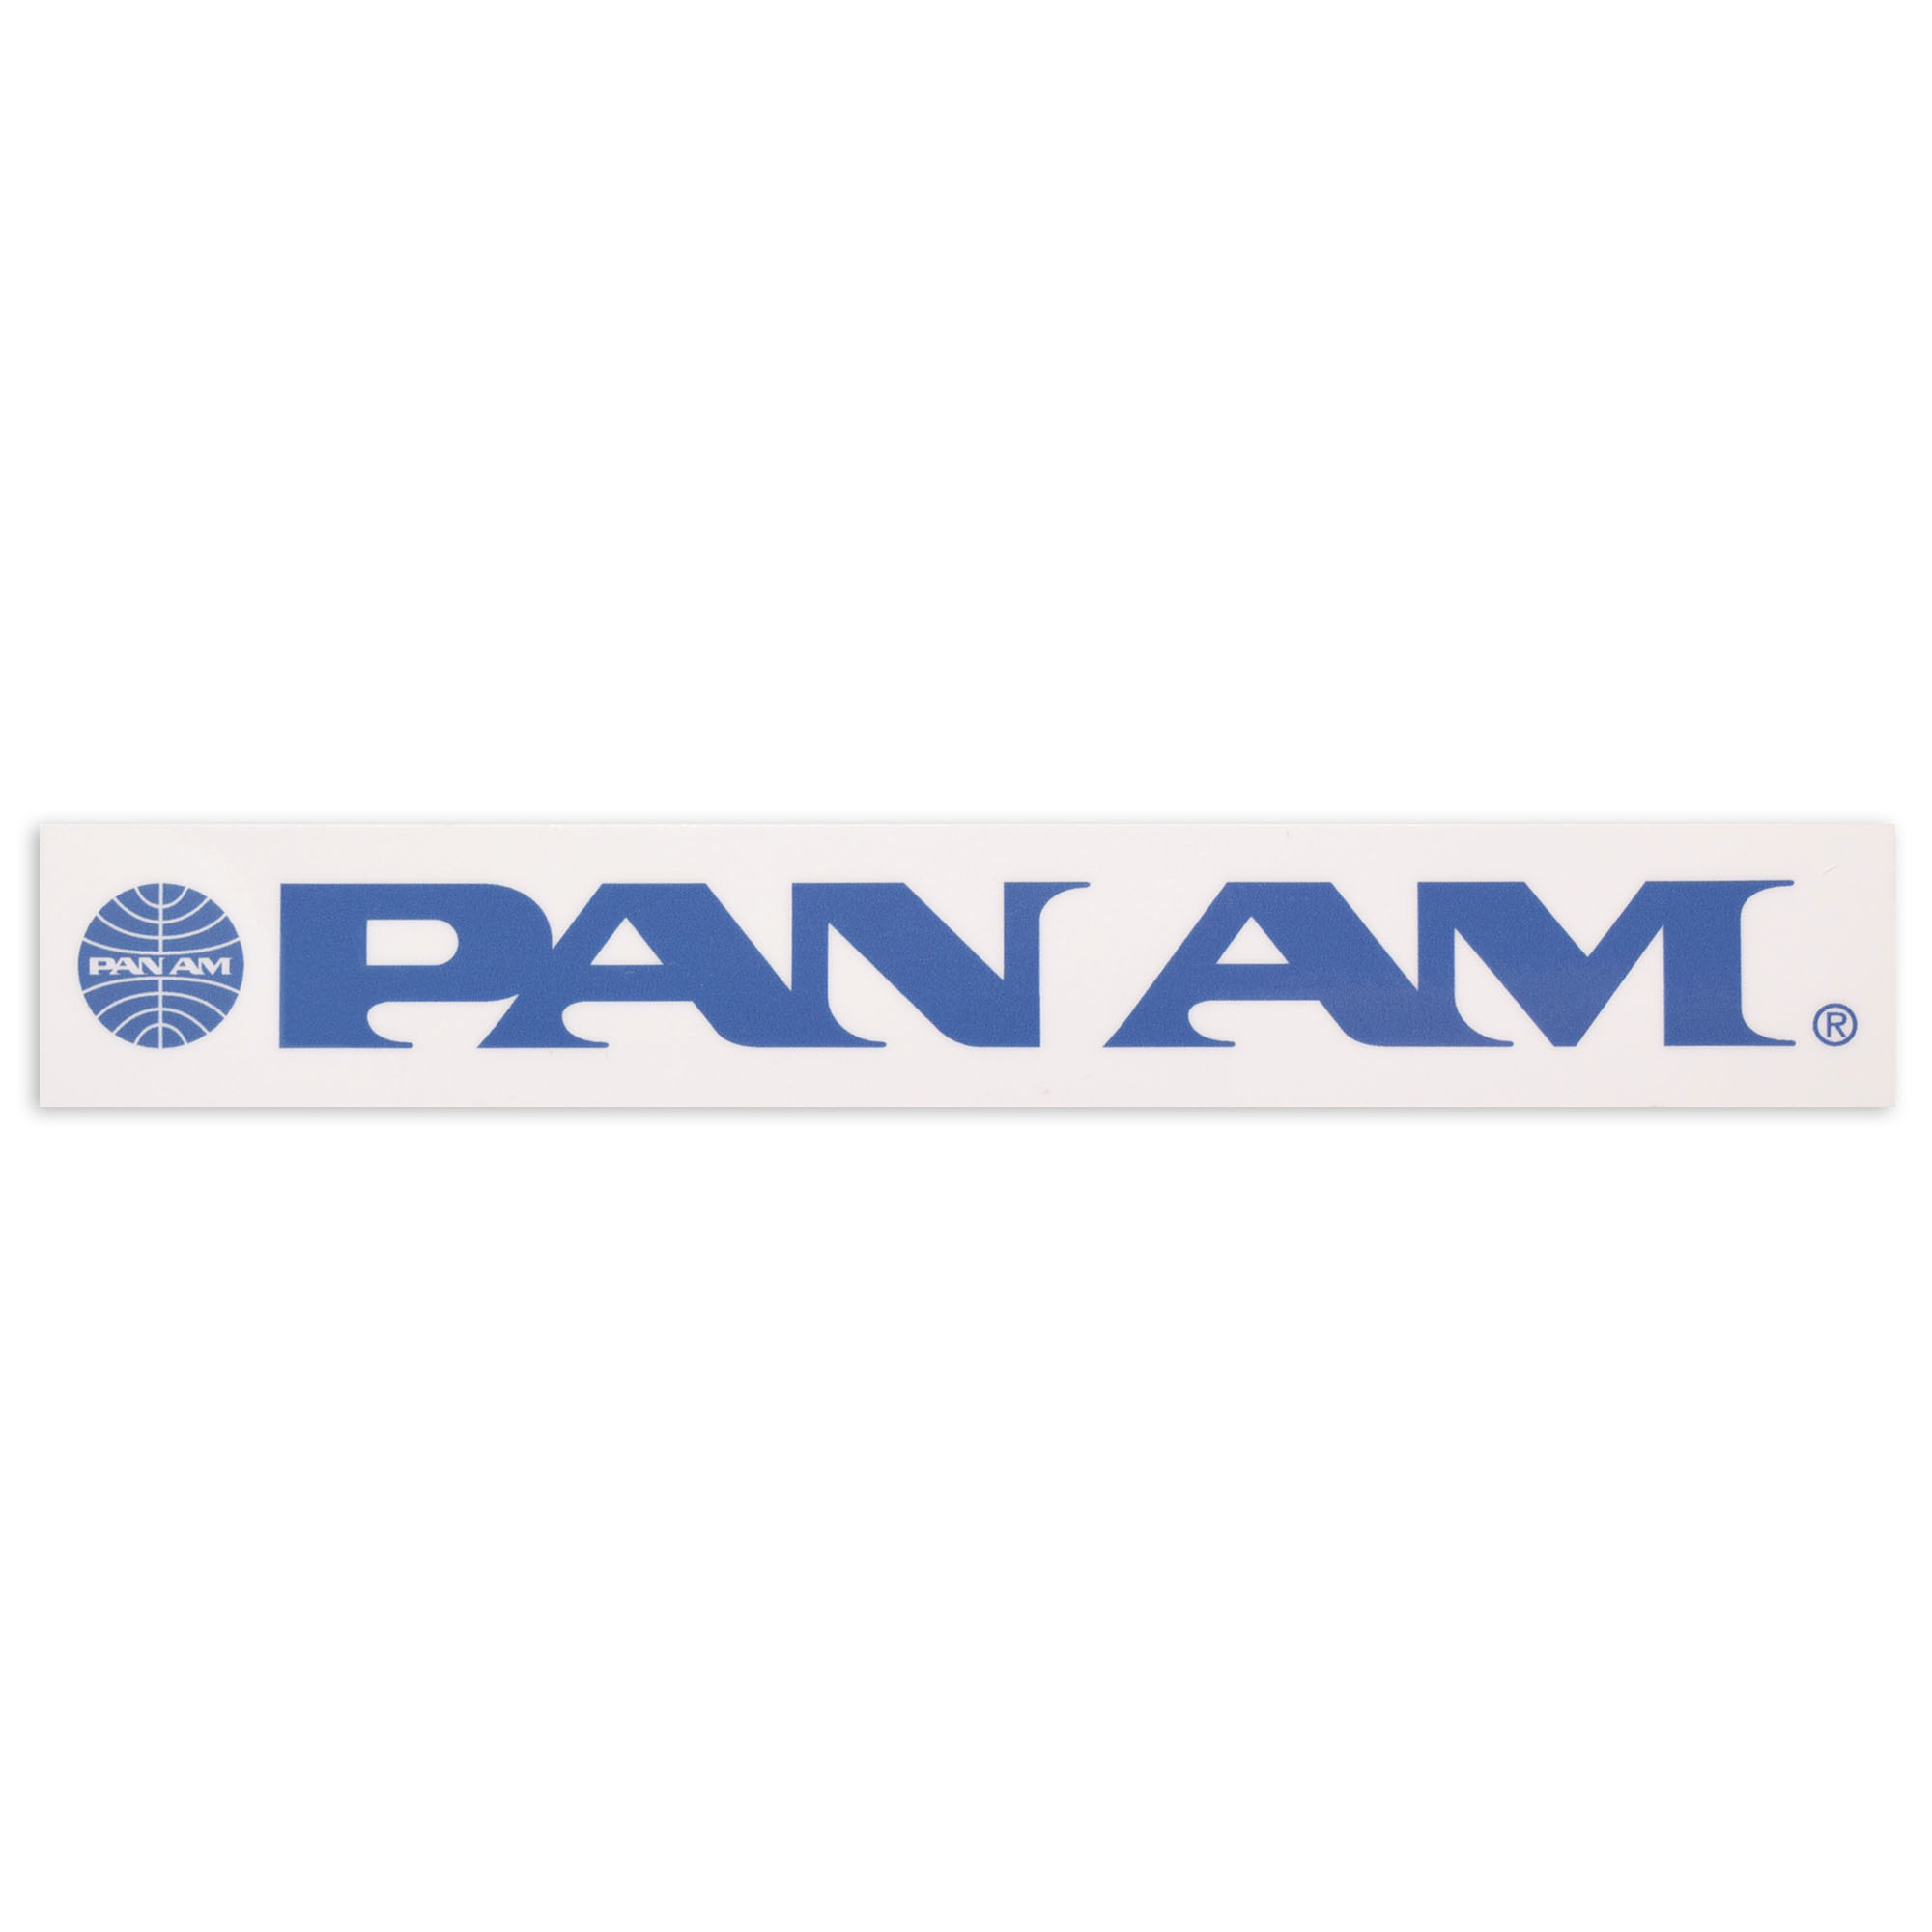 Me pan american Cut Out Stock Images & Pictures - Alamy